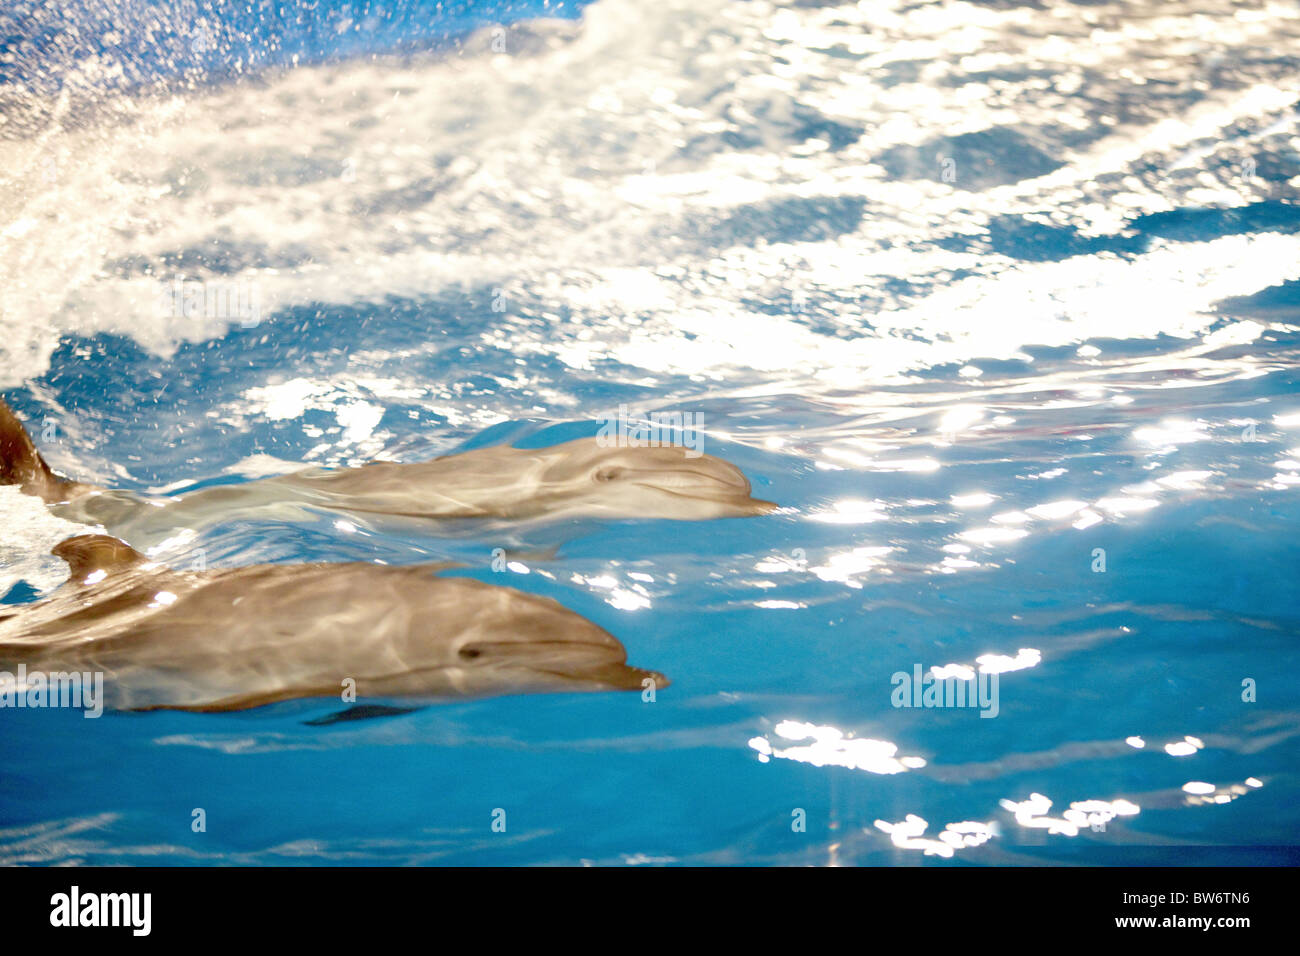 Couple of cute dolphins swimming under water Stock Photo